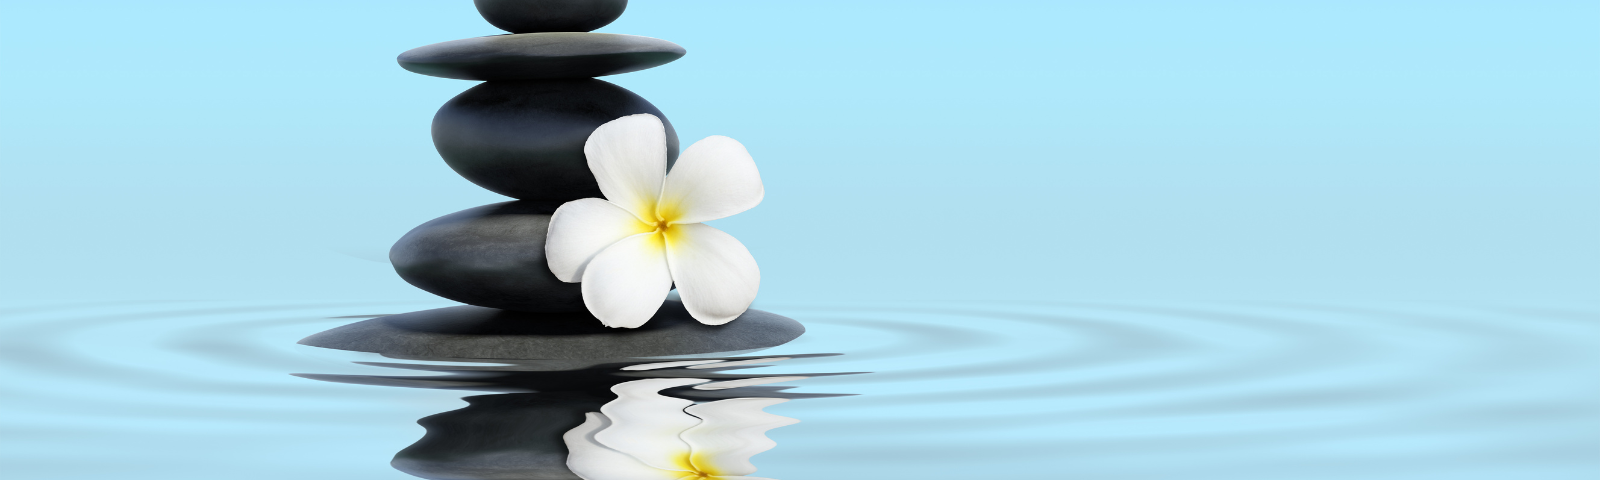 A stack of smooth black zen stones with a white frangipani flower on top is reflected on a serene blue water surface, symbolizing peace and balance.